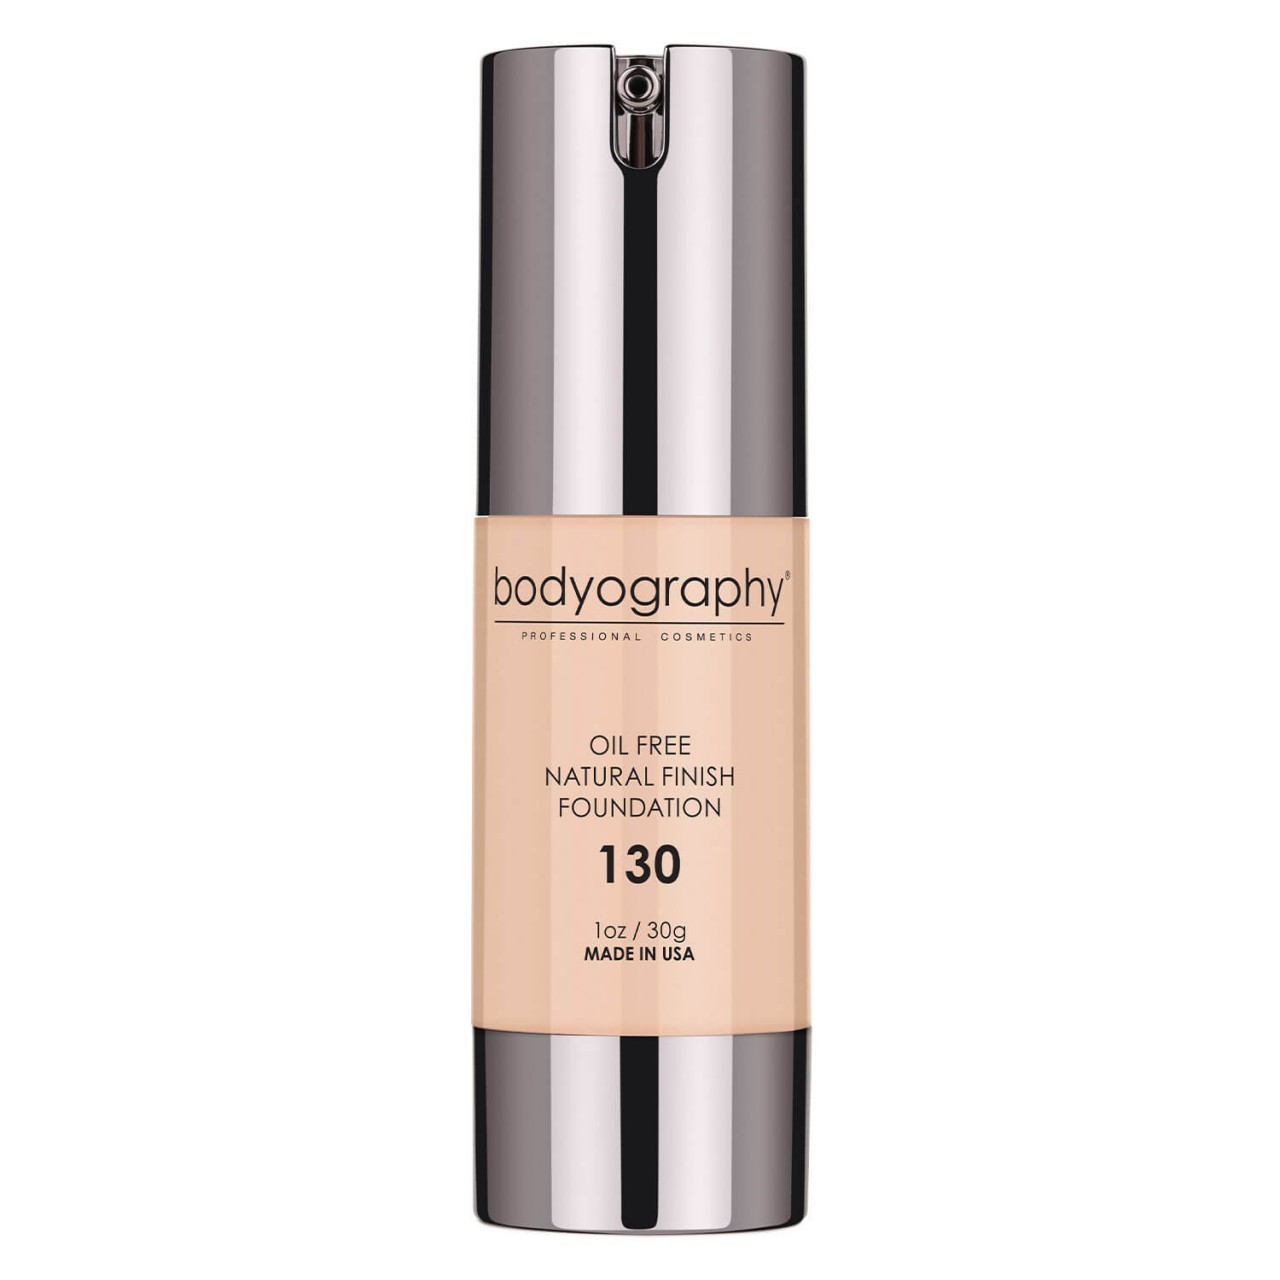 bodyography Teint - Oil Free Natural Finish Foundation Light/Med 130 von bodyography